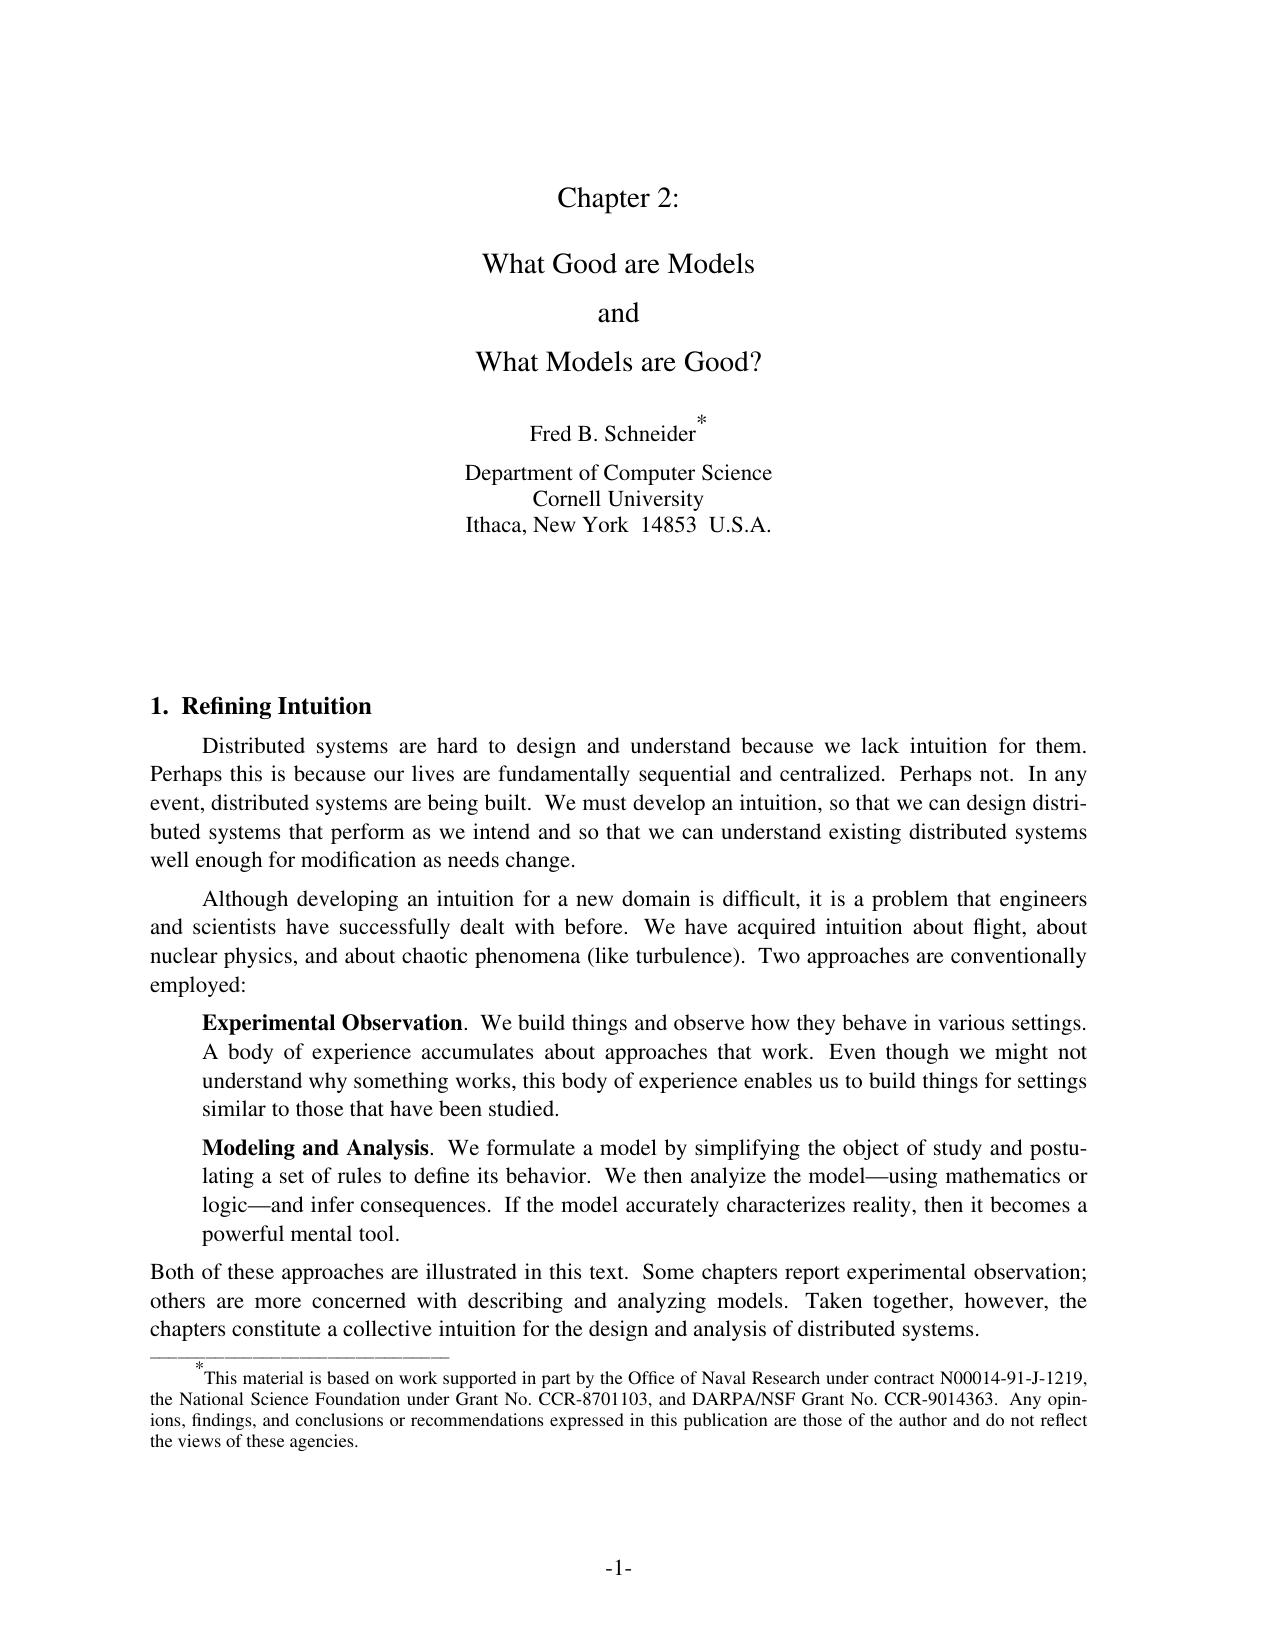 A Survey of Rollback-Recovery Protocols in Message-Passing Systems - Paper